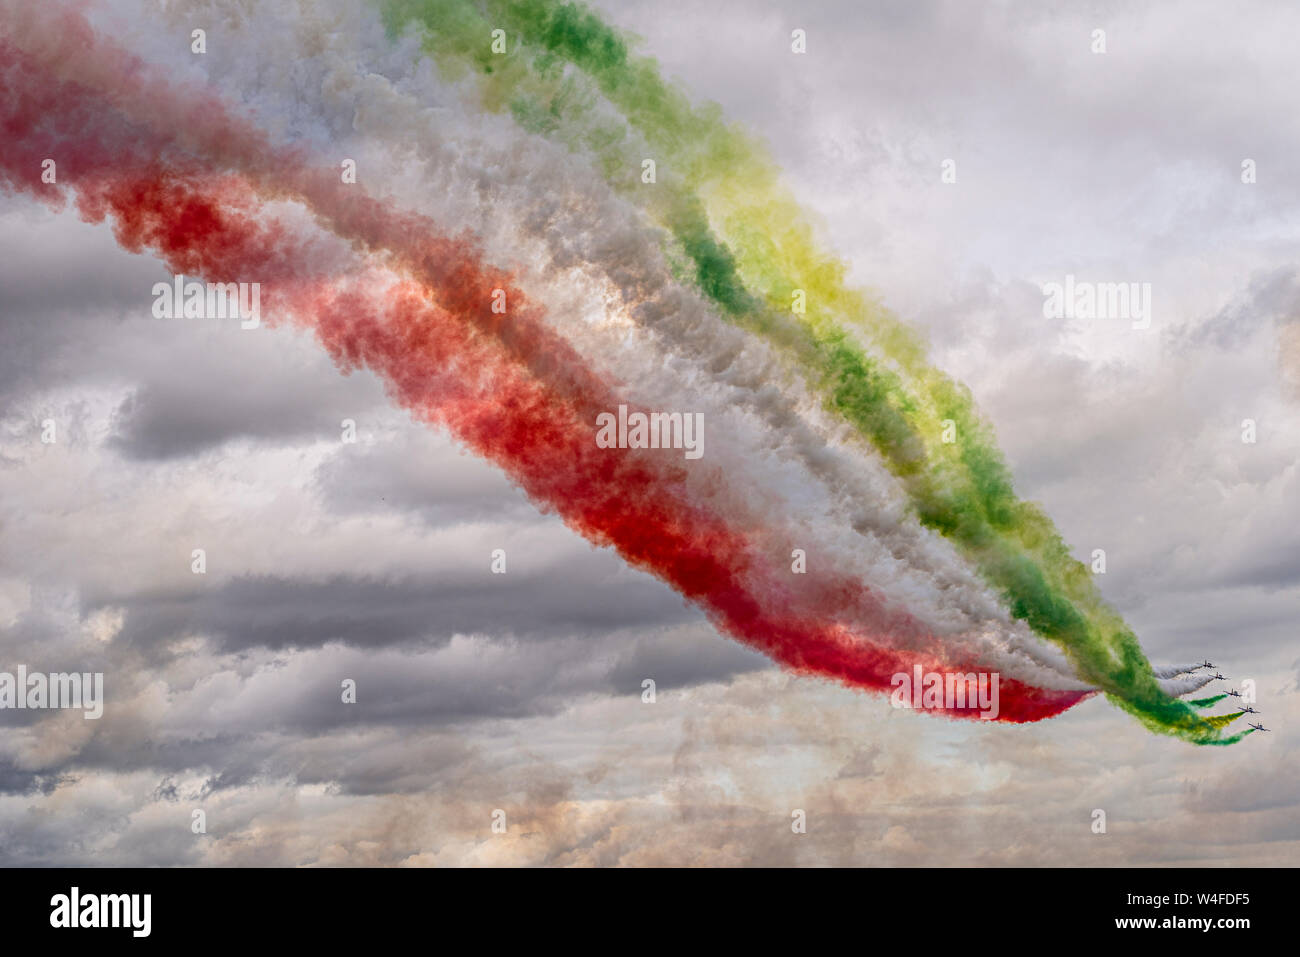 Largest Italian flag painted in the sky by Frecce Tricolori coloured smoke at Royal International Air Tattoo airshow, RAF Fairford, Cotswolds, UK. Stock Photo